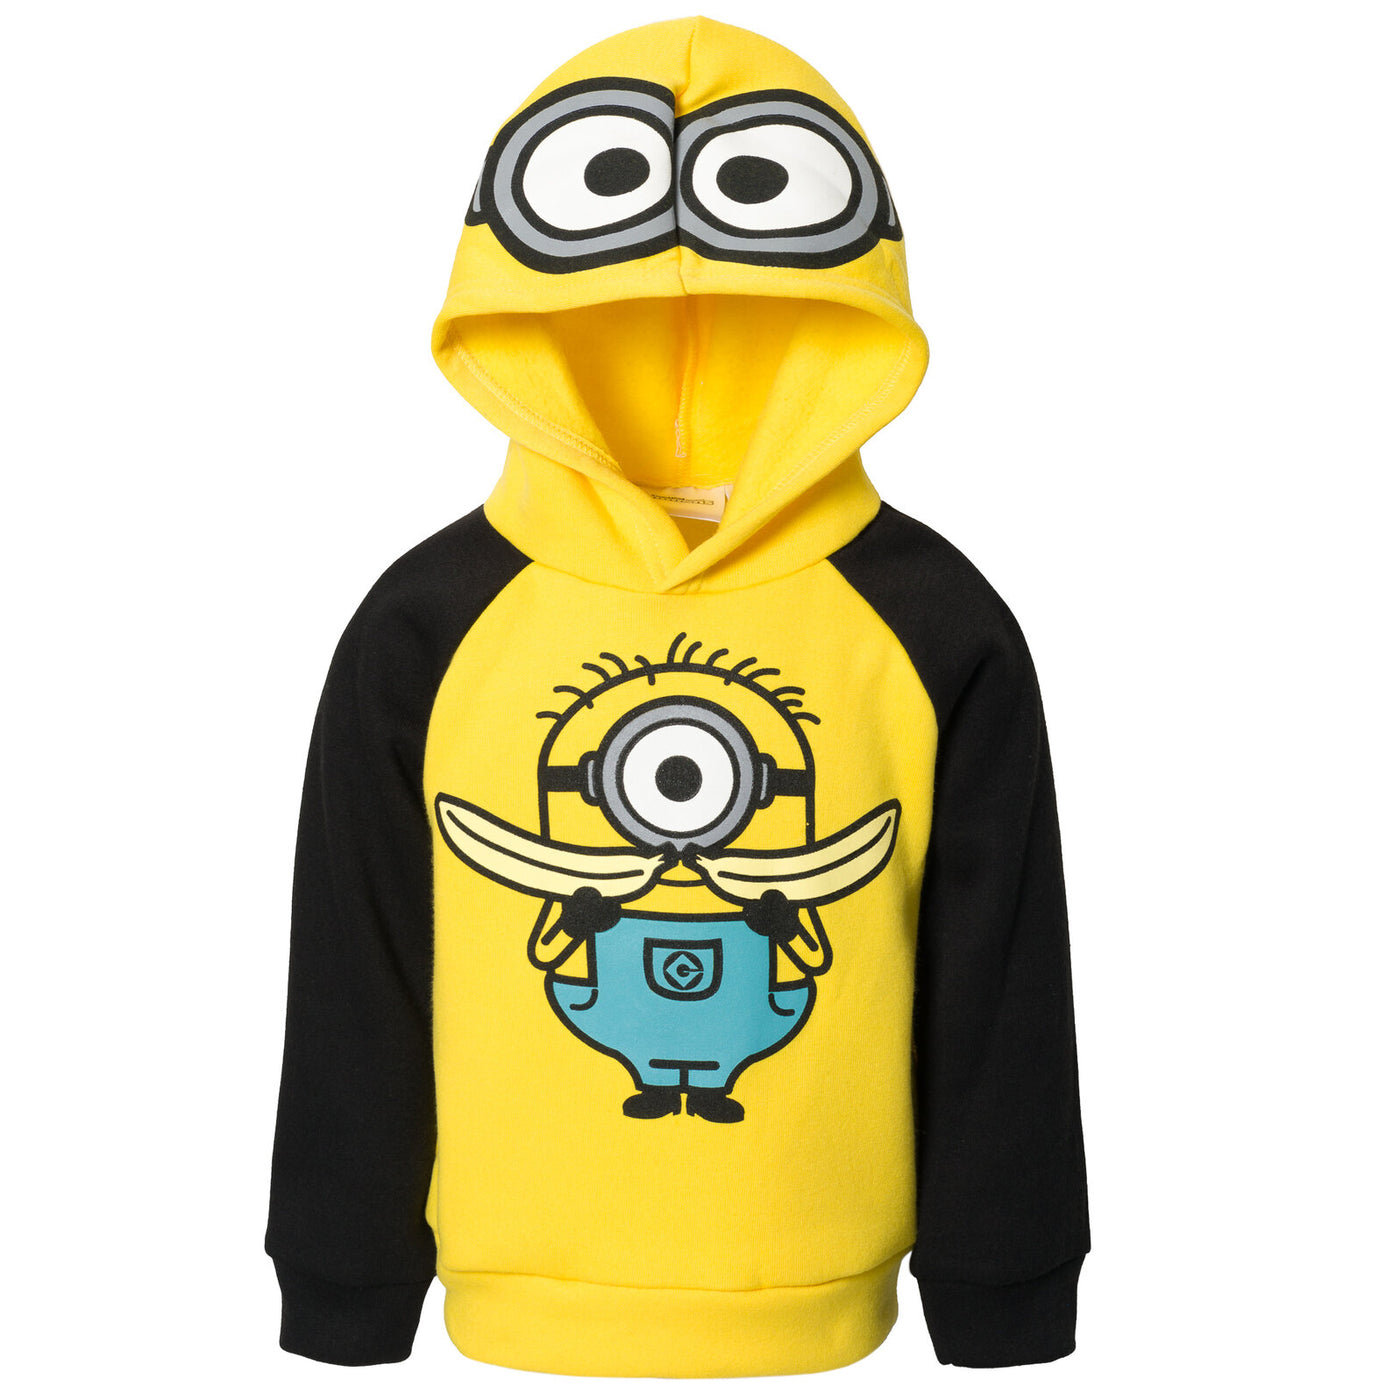 Despicable Me Minions Fleece Pullover Hoodie